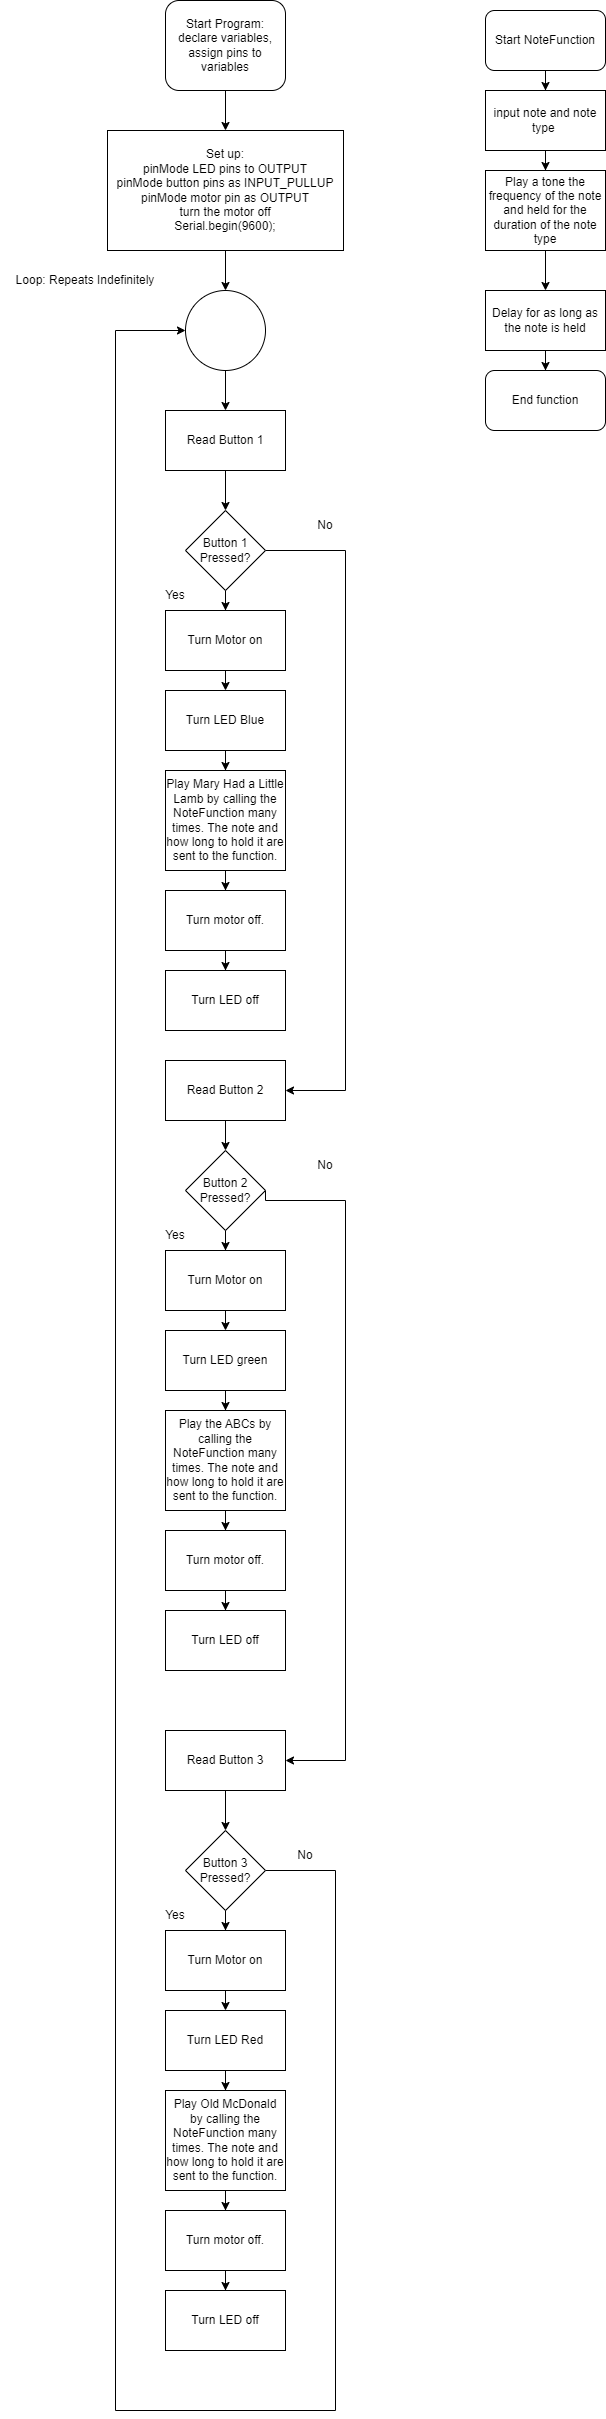 MusicBox Flowchart.png